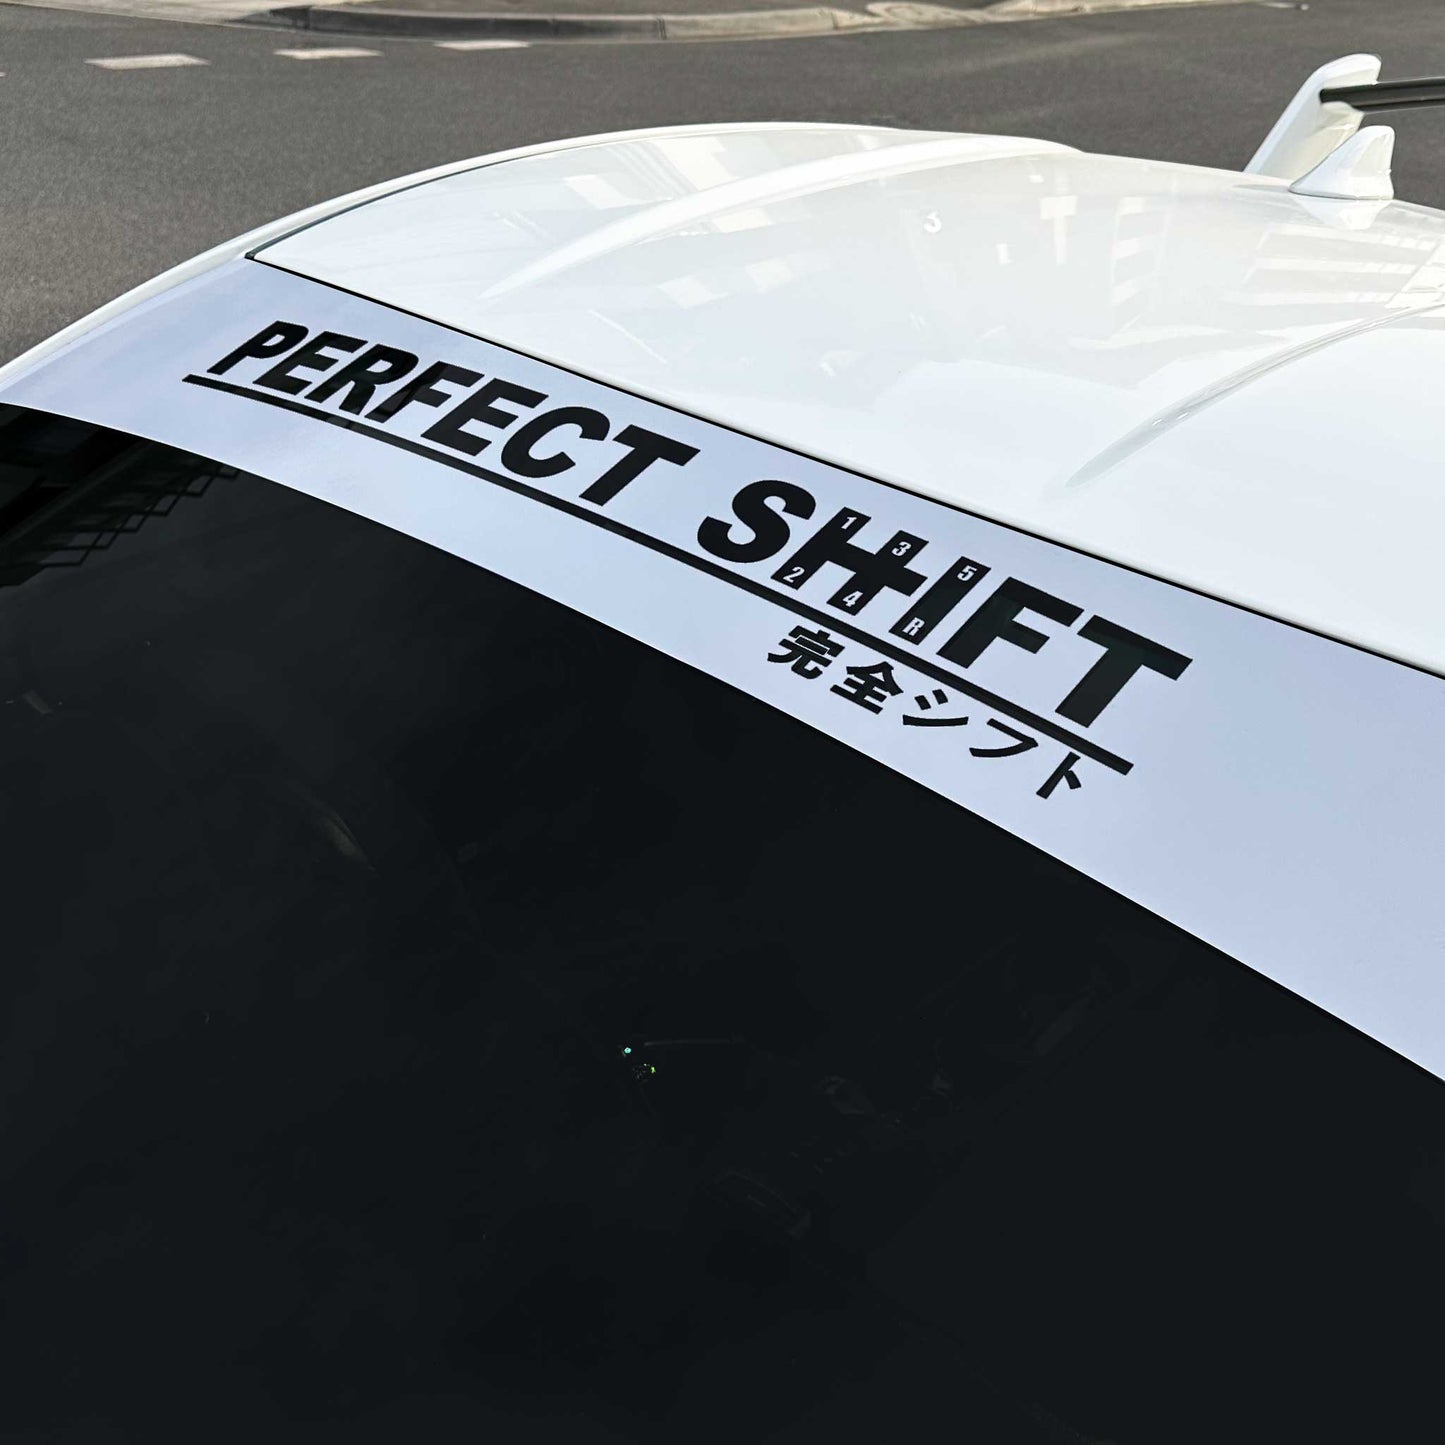 A branded Perfect Shift windshield banner with grey background applied on a Toyota 86 that is parked on street